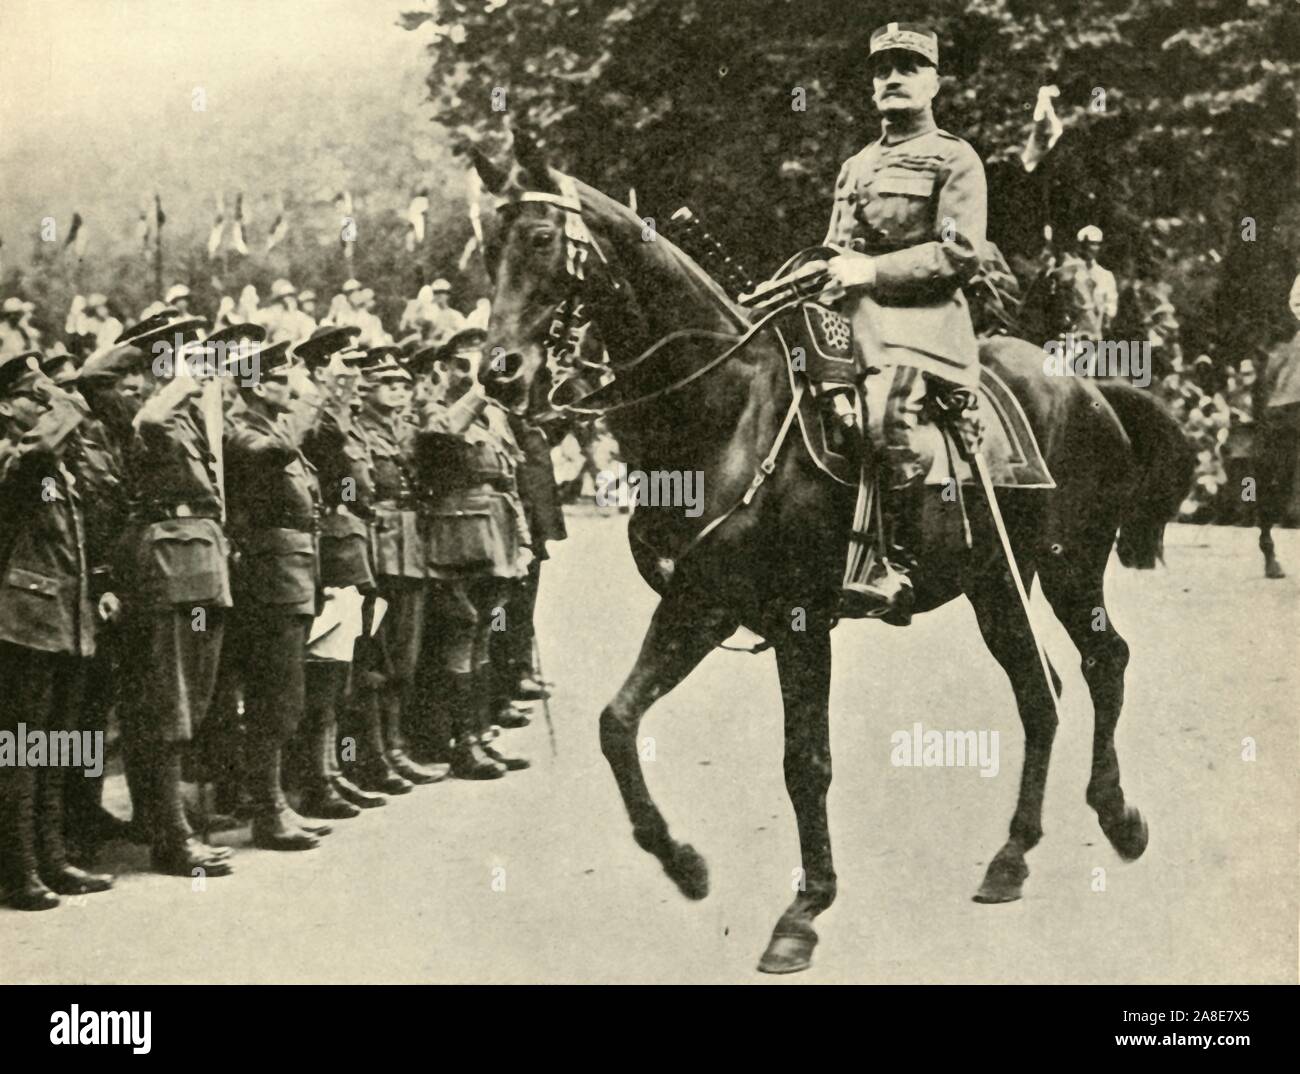 Marshal Foch at the Victory Day Procession, London, 19 July 1919, (c1920). 'A Salute from the Guards: Marshal Foch, baton in hand, riding at the head of the French troops...'. Marshal Ferdinand Foch (1851-1929), supreme commander of the Allied Armies, takes part in the Peace Day celebrations to mark the end of the First World War. From &quot;The Great World War: A History&quot;, Volume IX, edited by Frank A Mumby. [The Gresham Publishing Company Ltd, London, c1920] Stock Photo